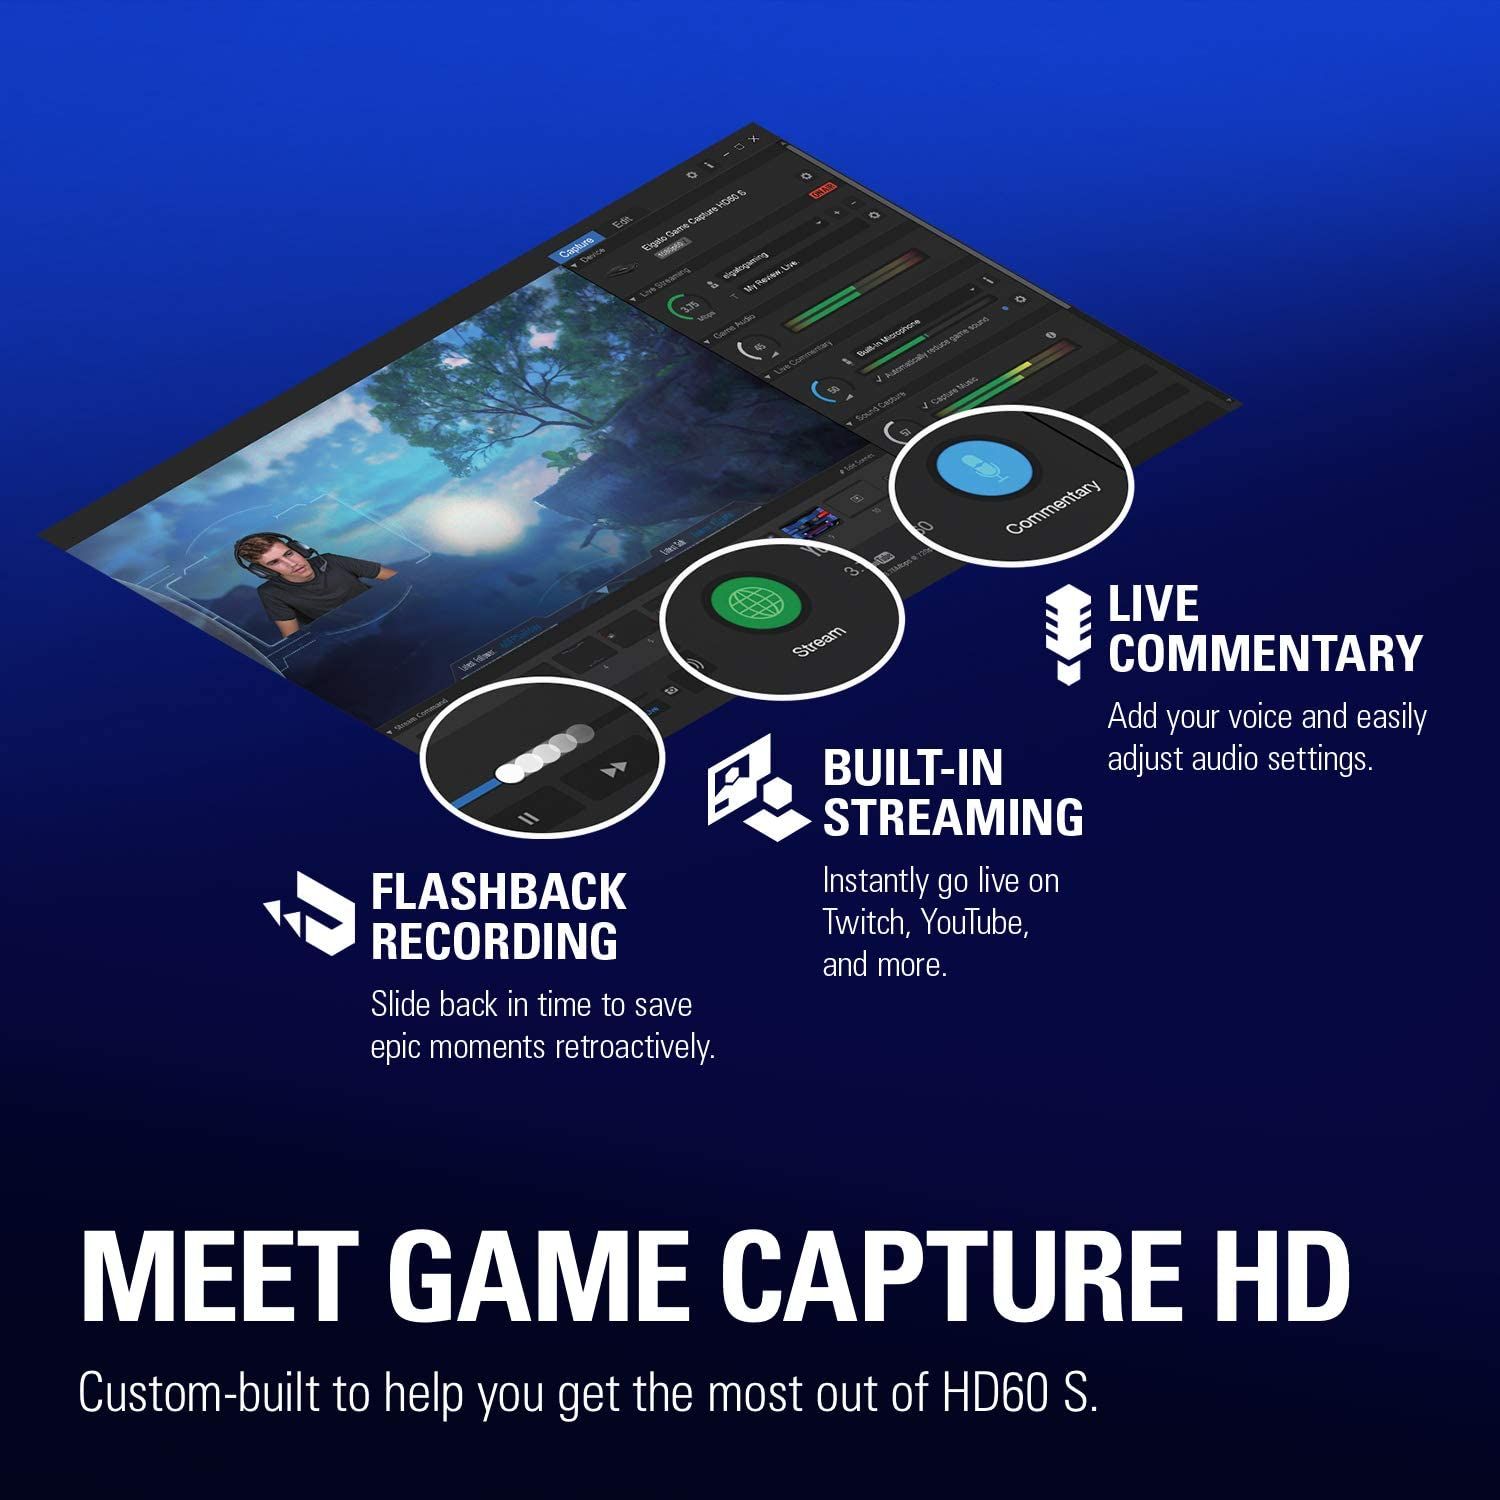 A visual showing extra features of Elgato HD60 S